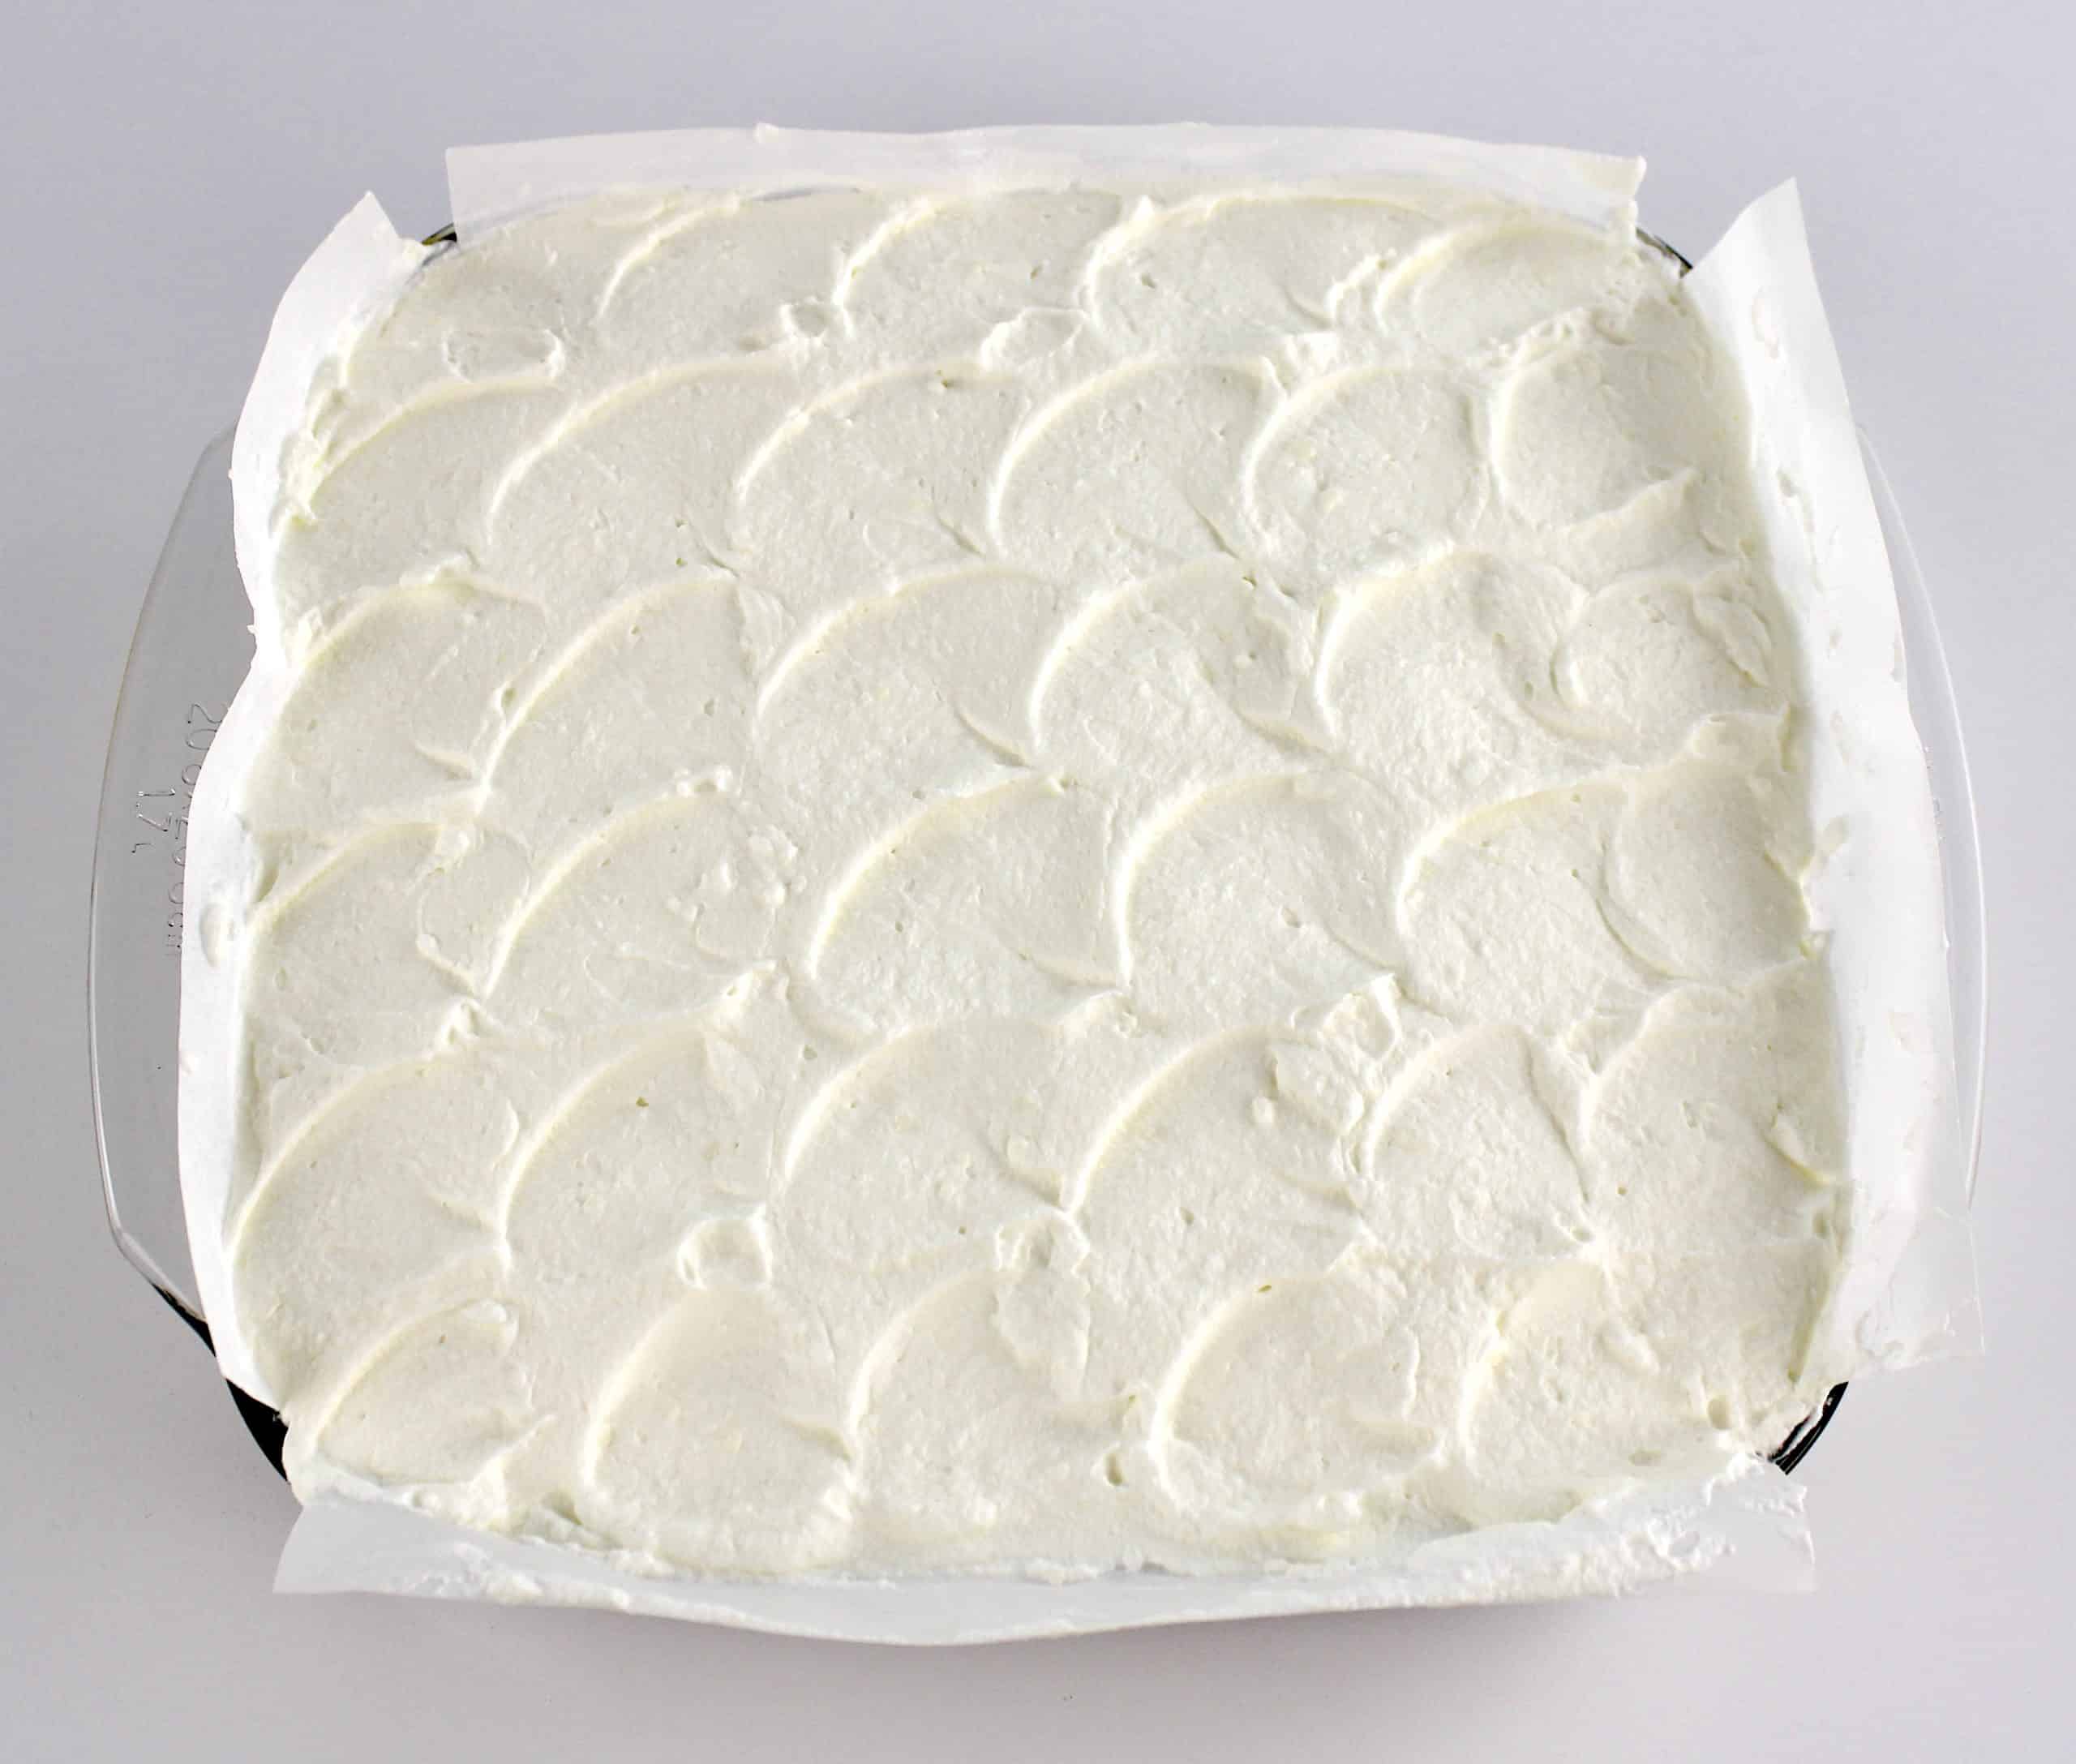 Keto Lemon Lush whipped topping layer in glass dish with parchment paper